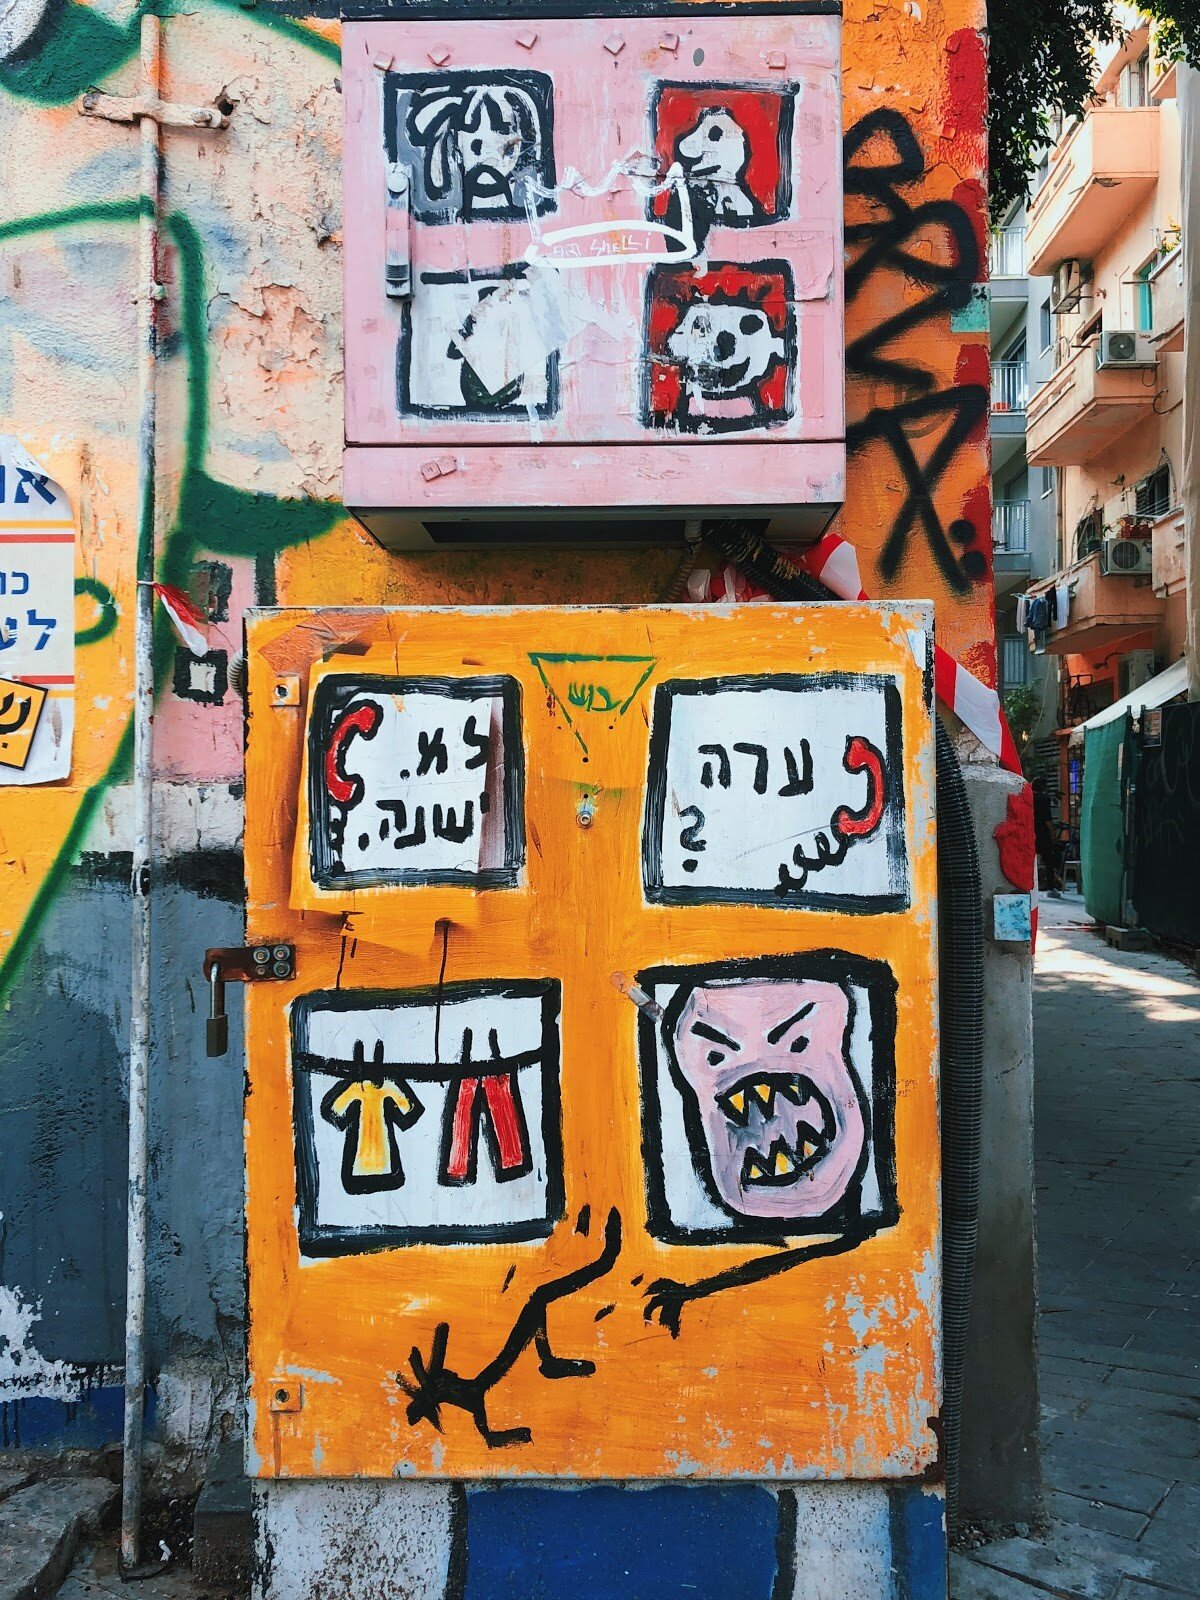  A painted electrical box on a street in Tel Aviv 